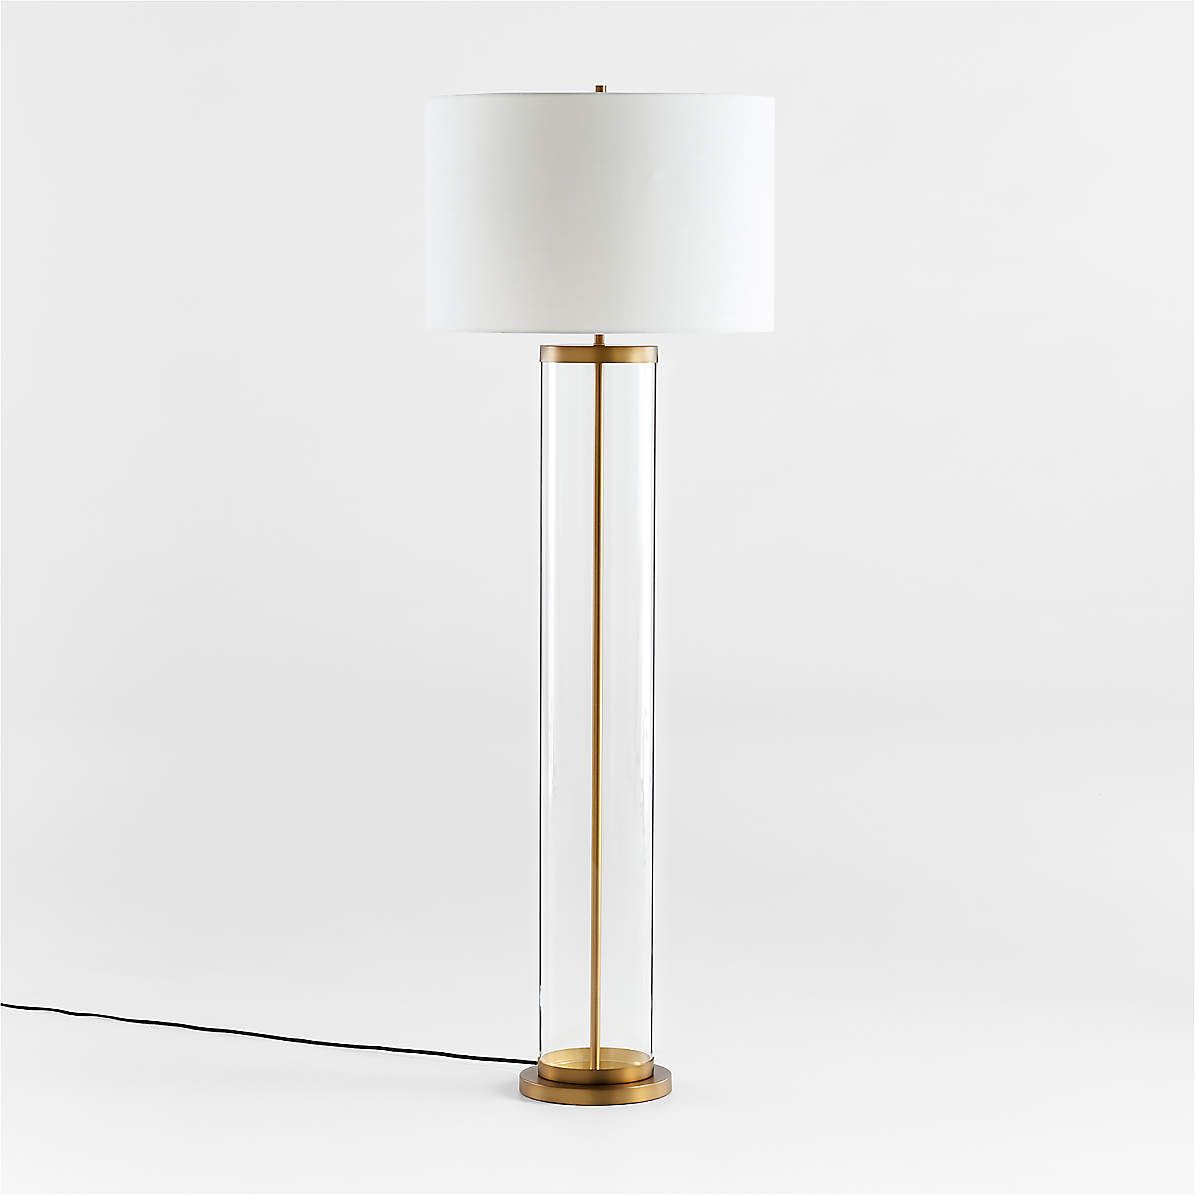 Promenade Avenue Black And Brass Floor Lamp With White Shade + Reviews |  Crate & Barrel For White Shade Floor Lamps (View 14 of 15)